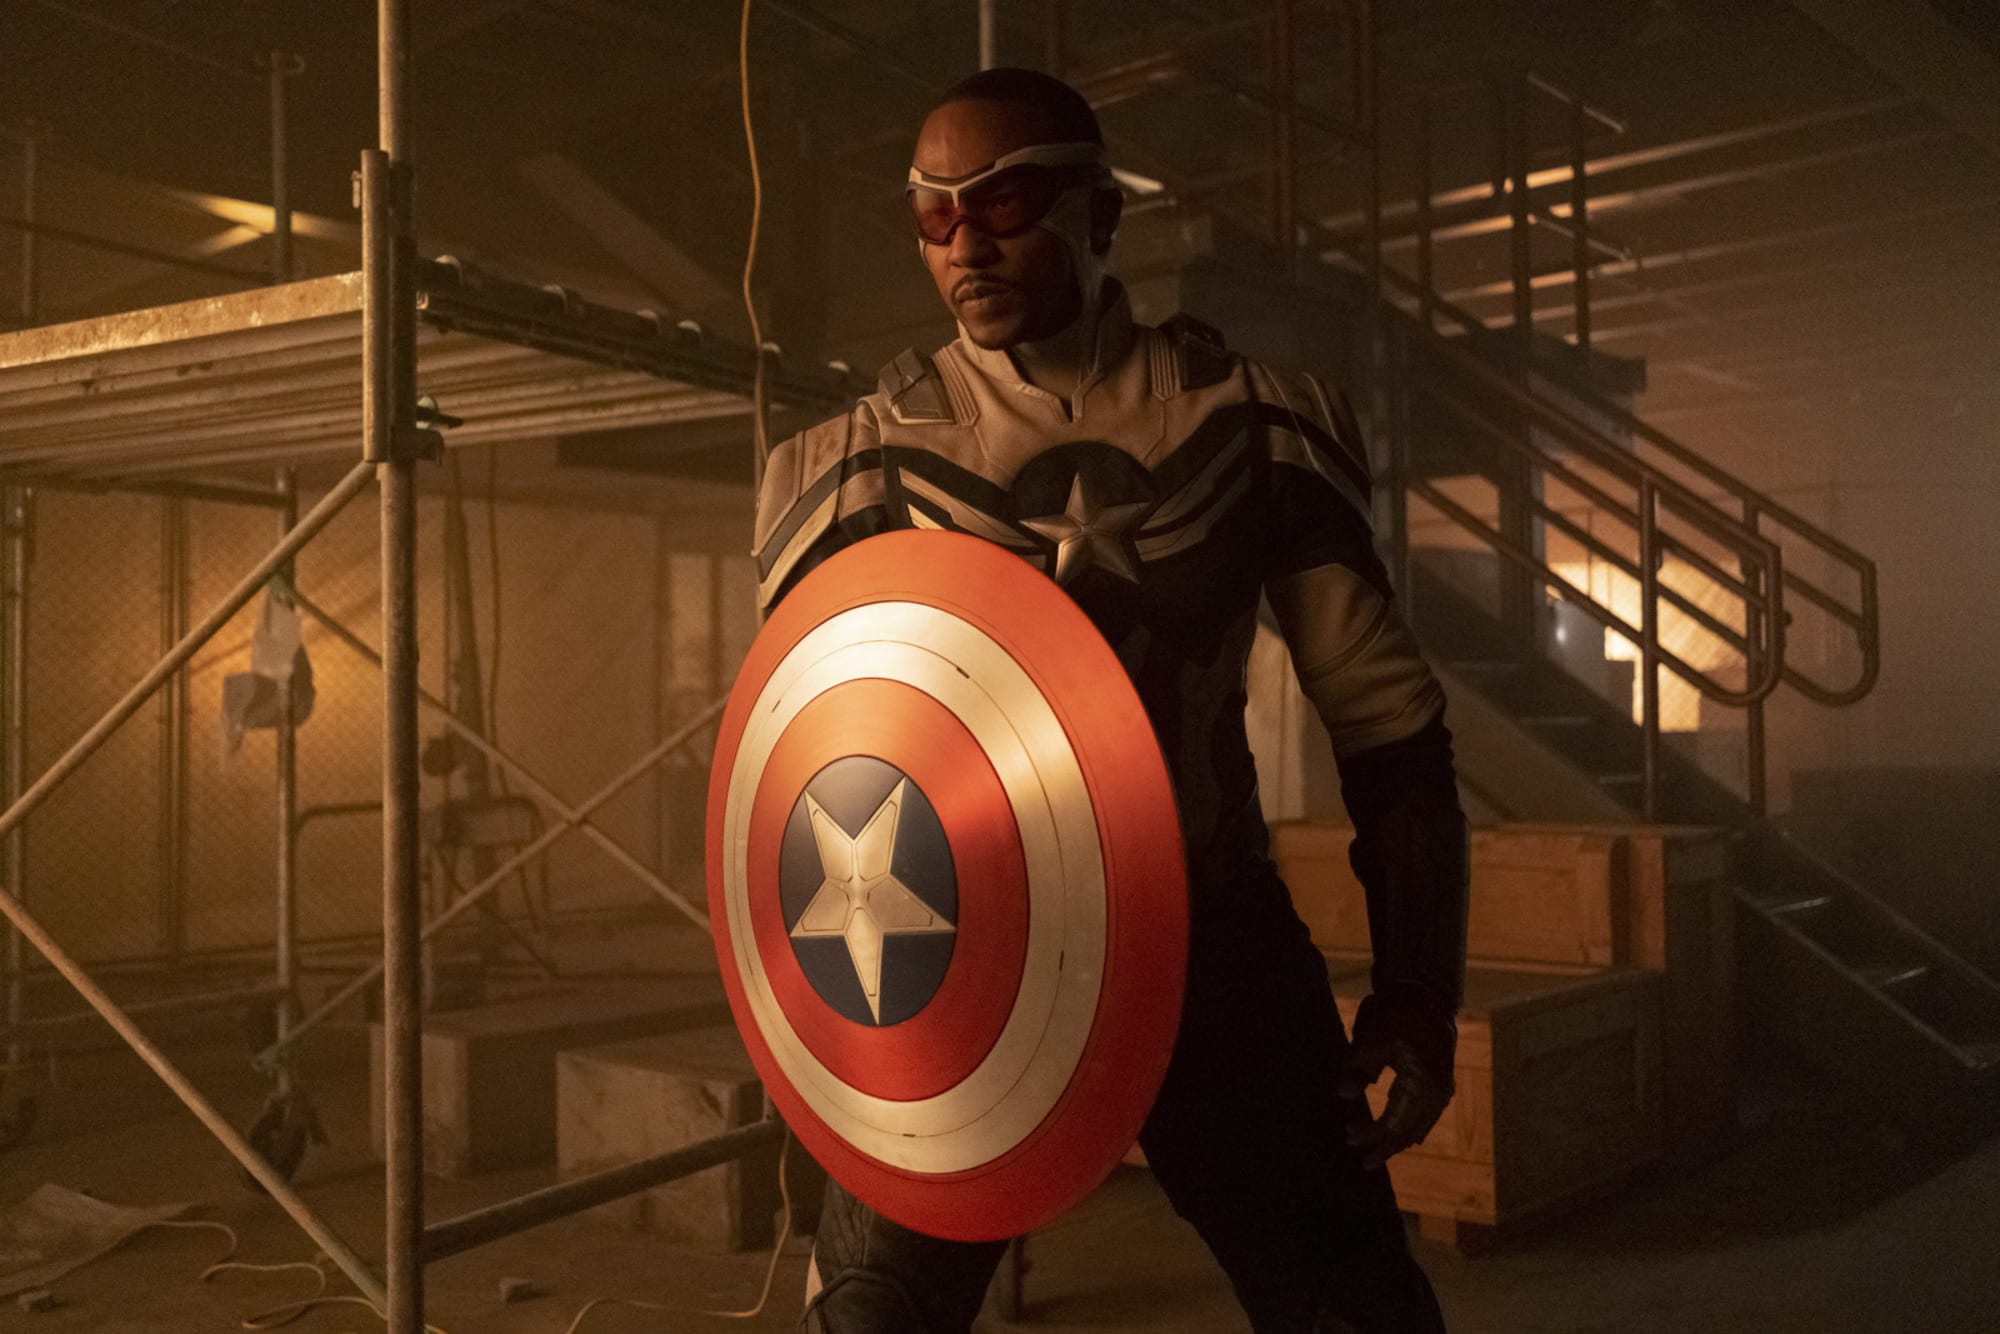 Anthony Mackie suits up as Captain America in jaw-dropping new trailer